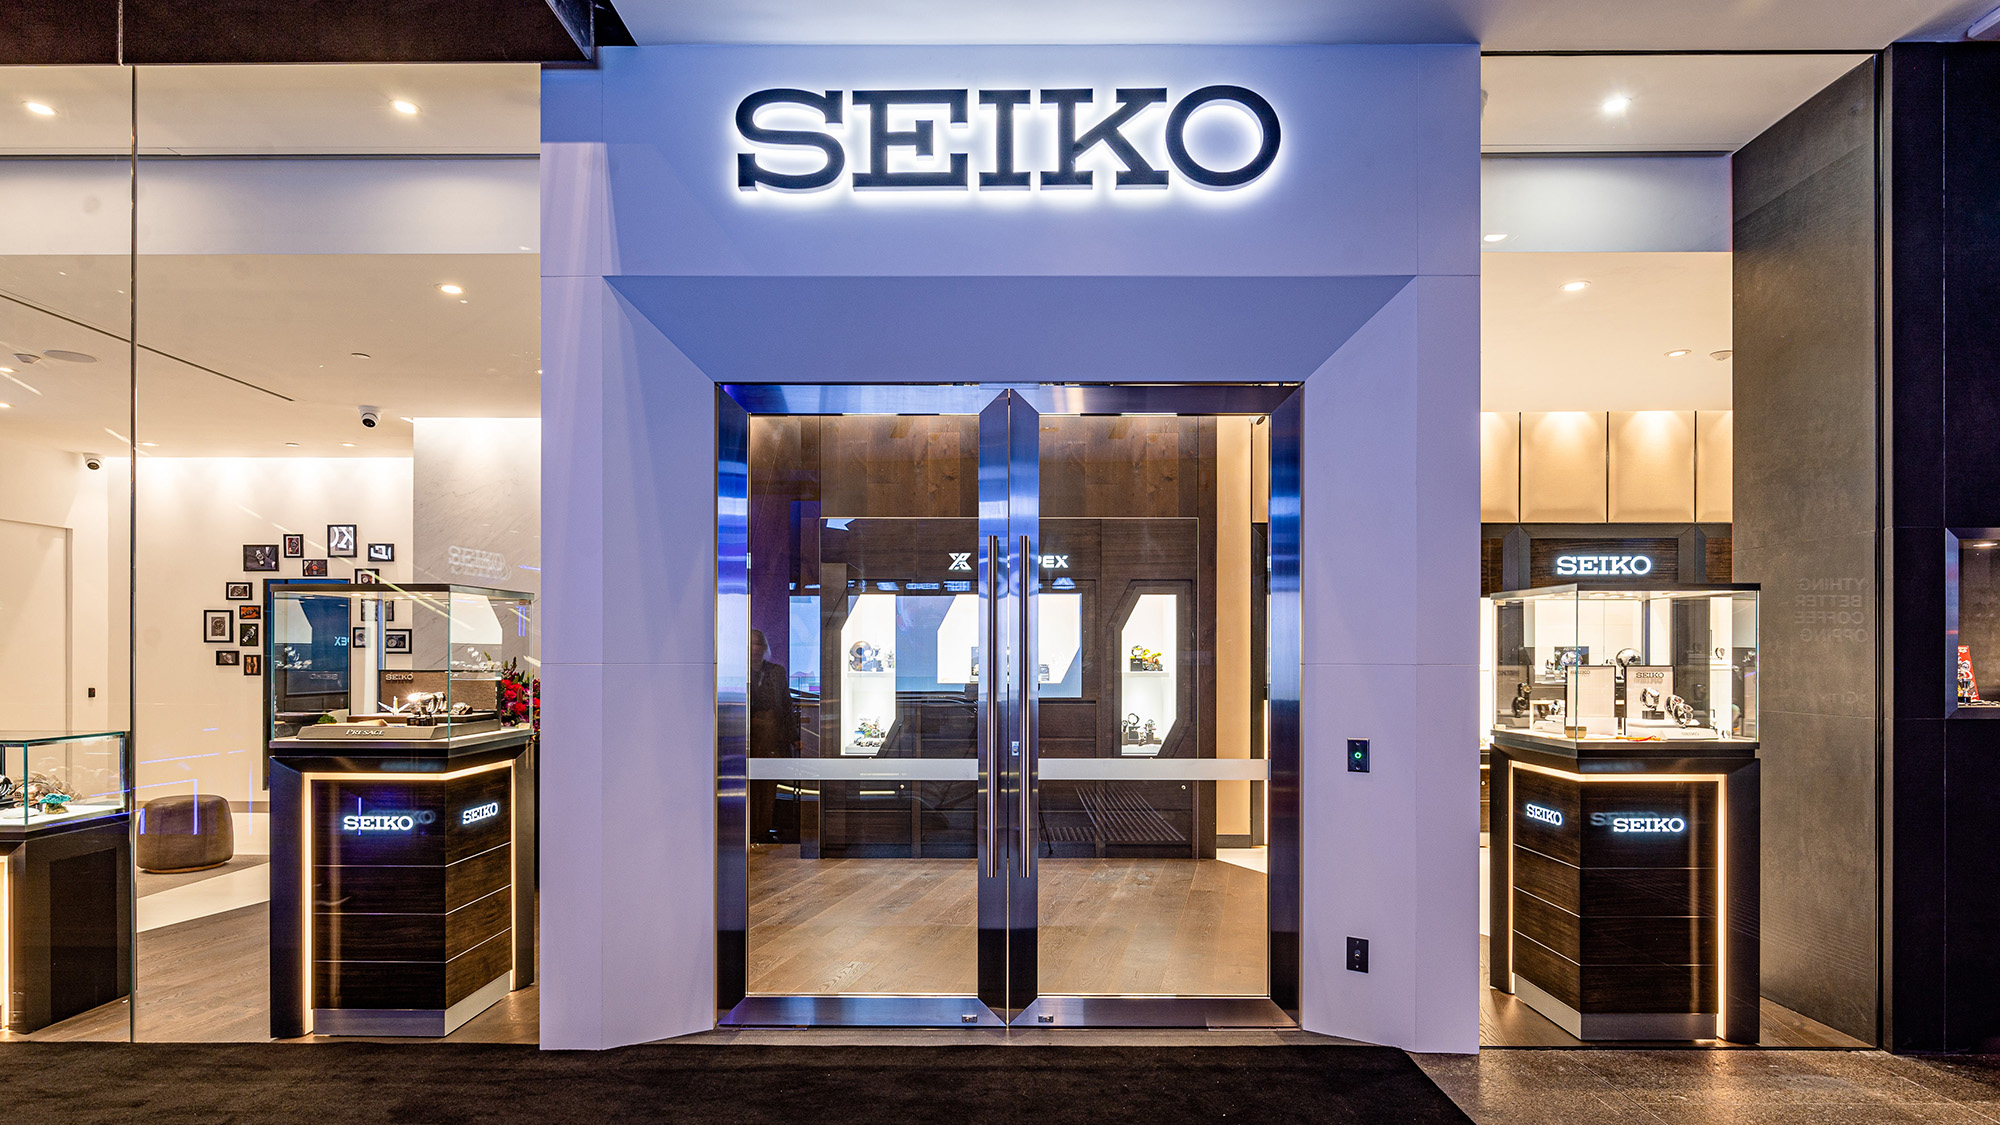 Seiko Re-Opens Its New Sydney Boutique at MidCity | Seiko Watch Corporation